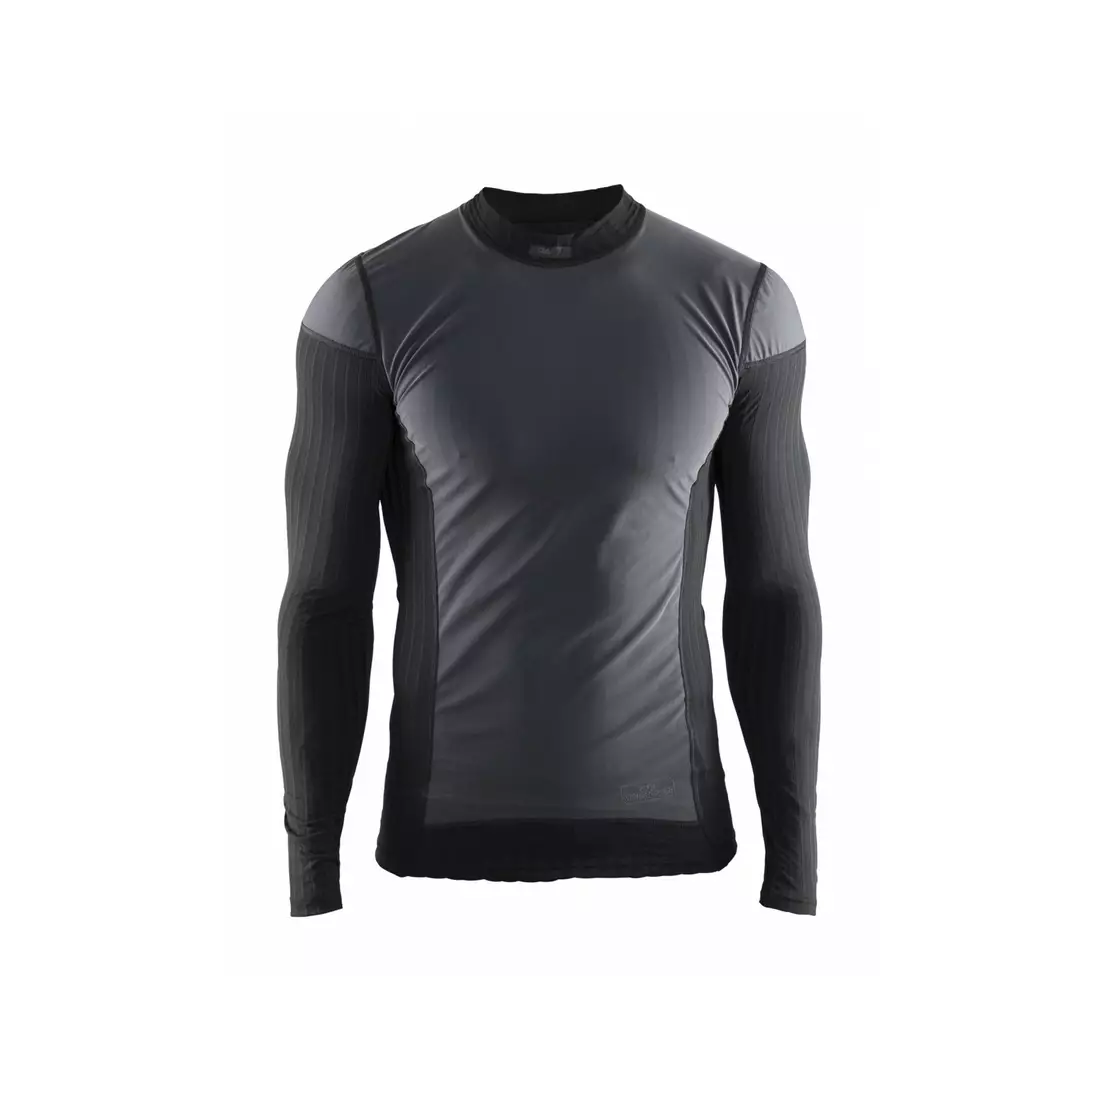 CRAFT BE ACTIVE EXTREME 2.0 WINDSTOPPER men's T-shirt 1904505-9999